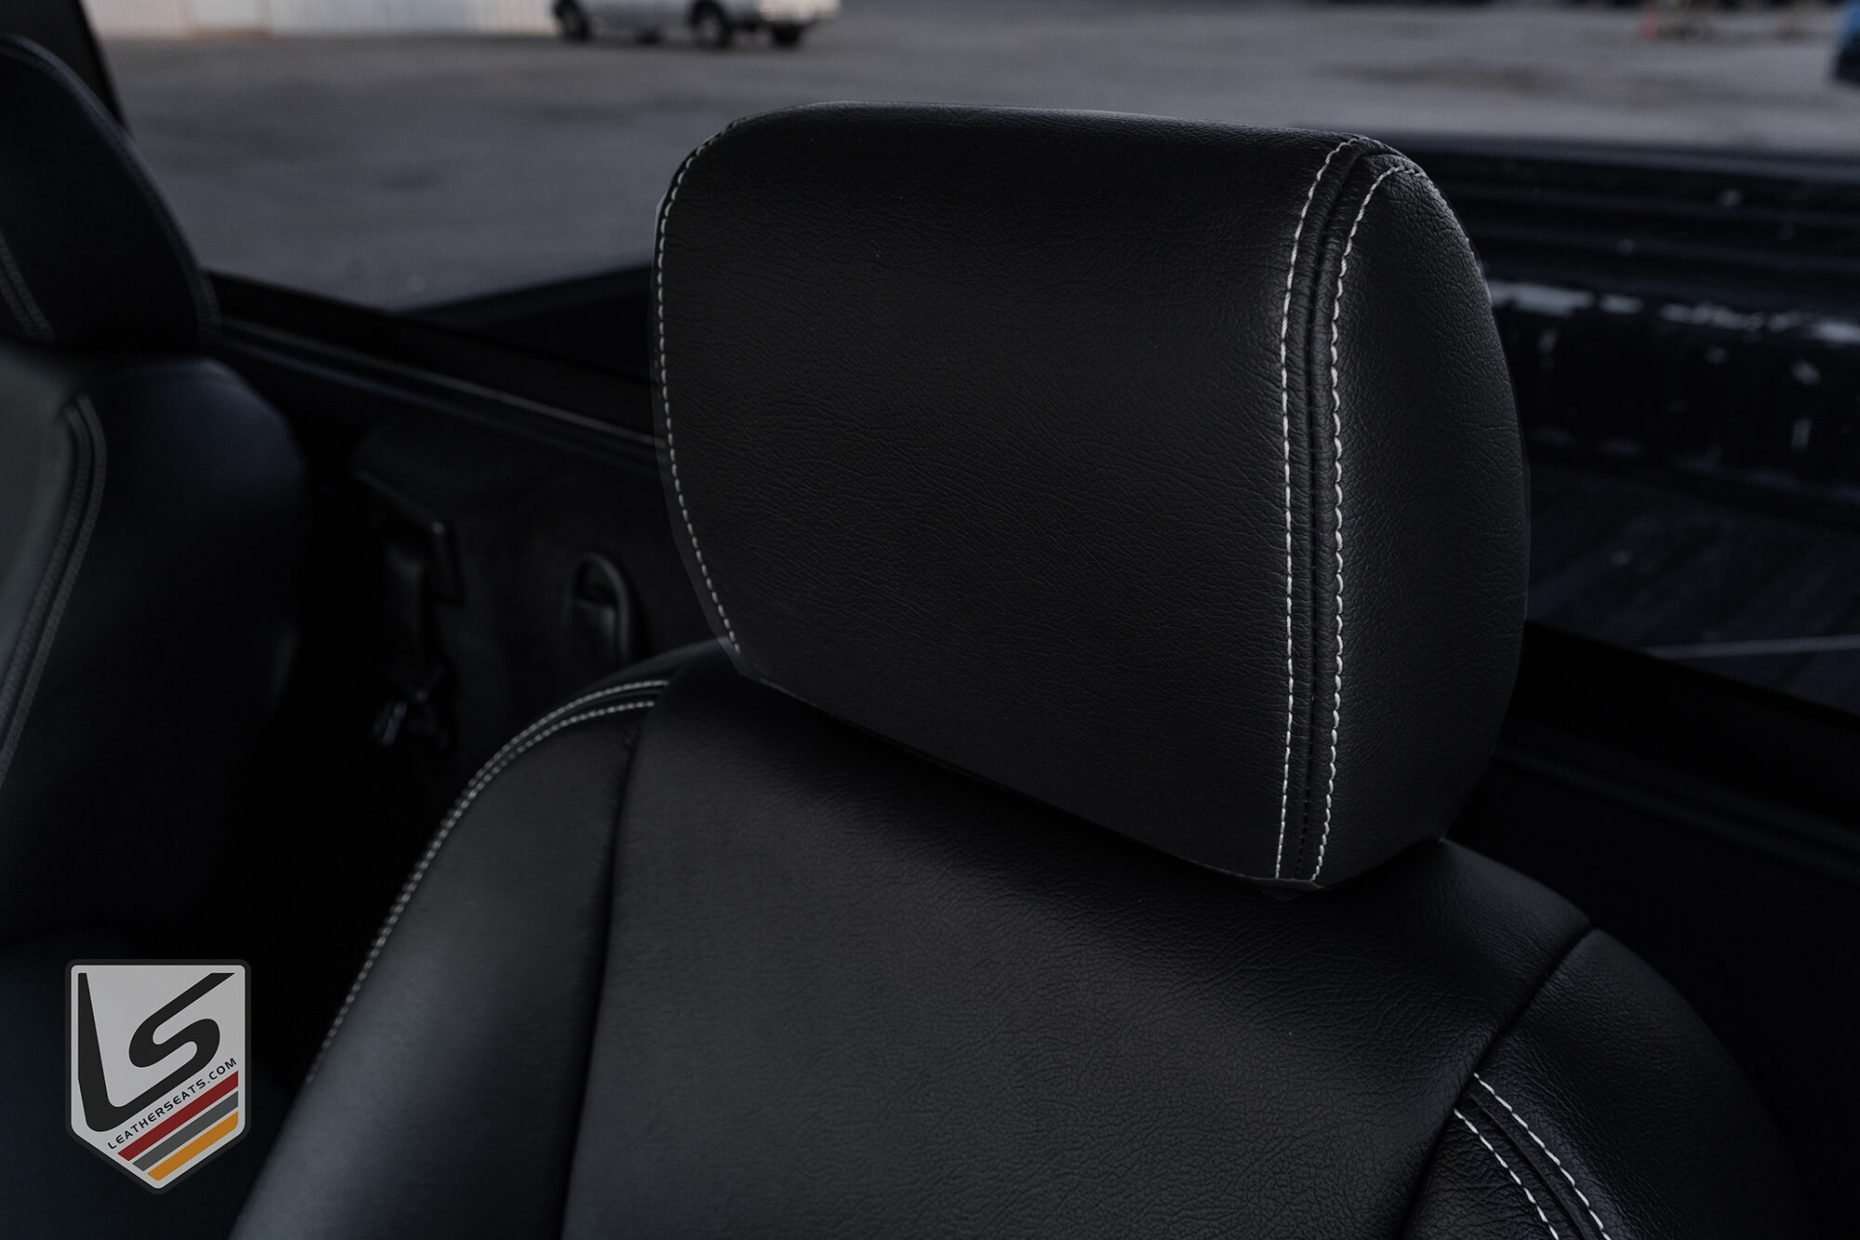 Dodge Ram leather headrest close-up with contrasting White stitching